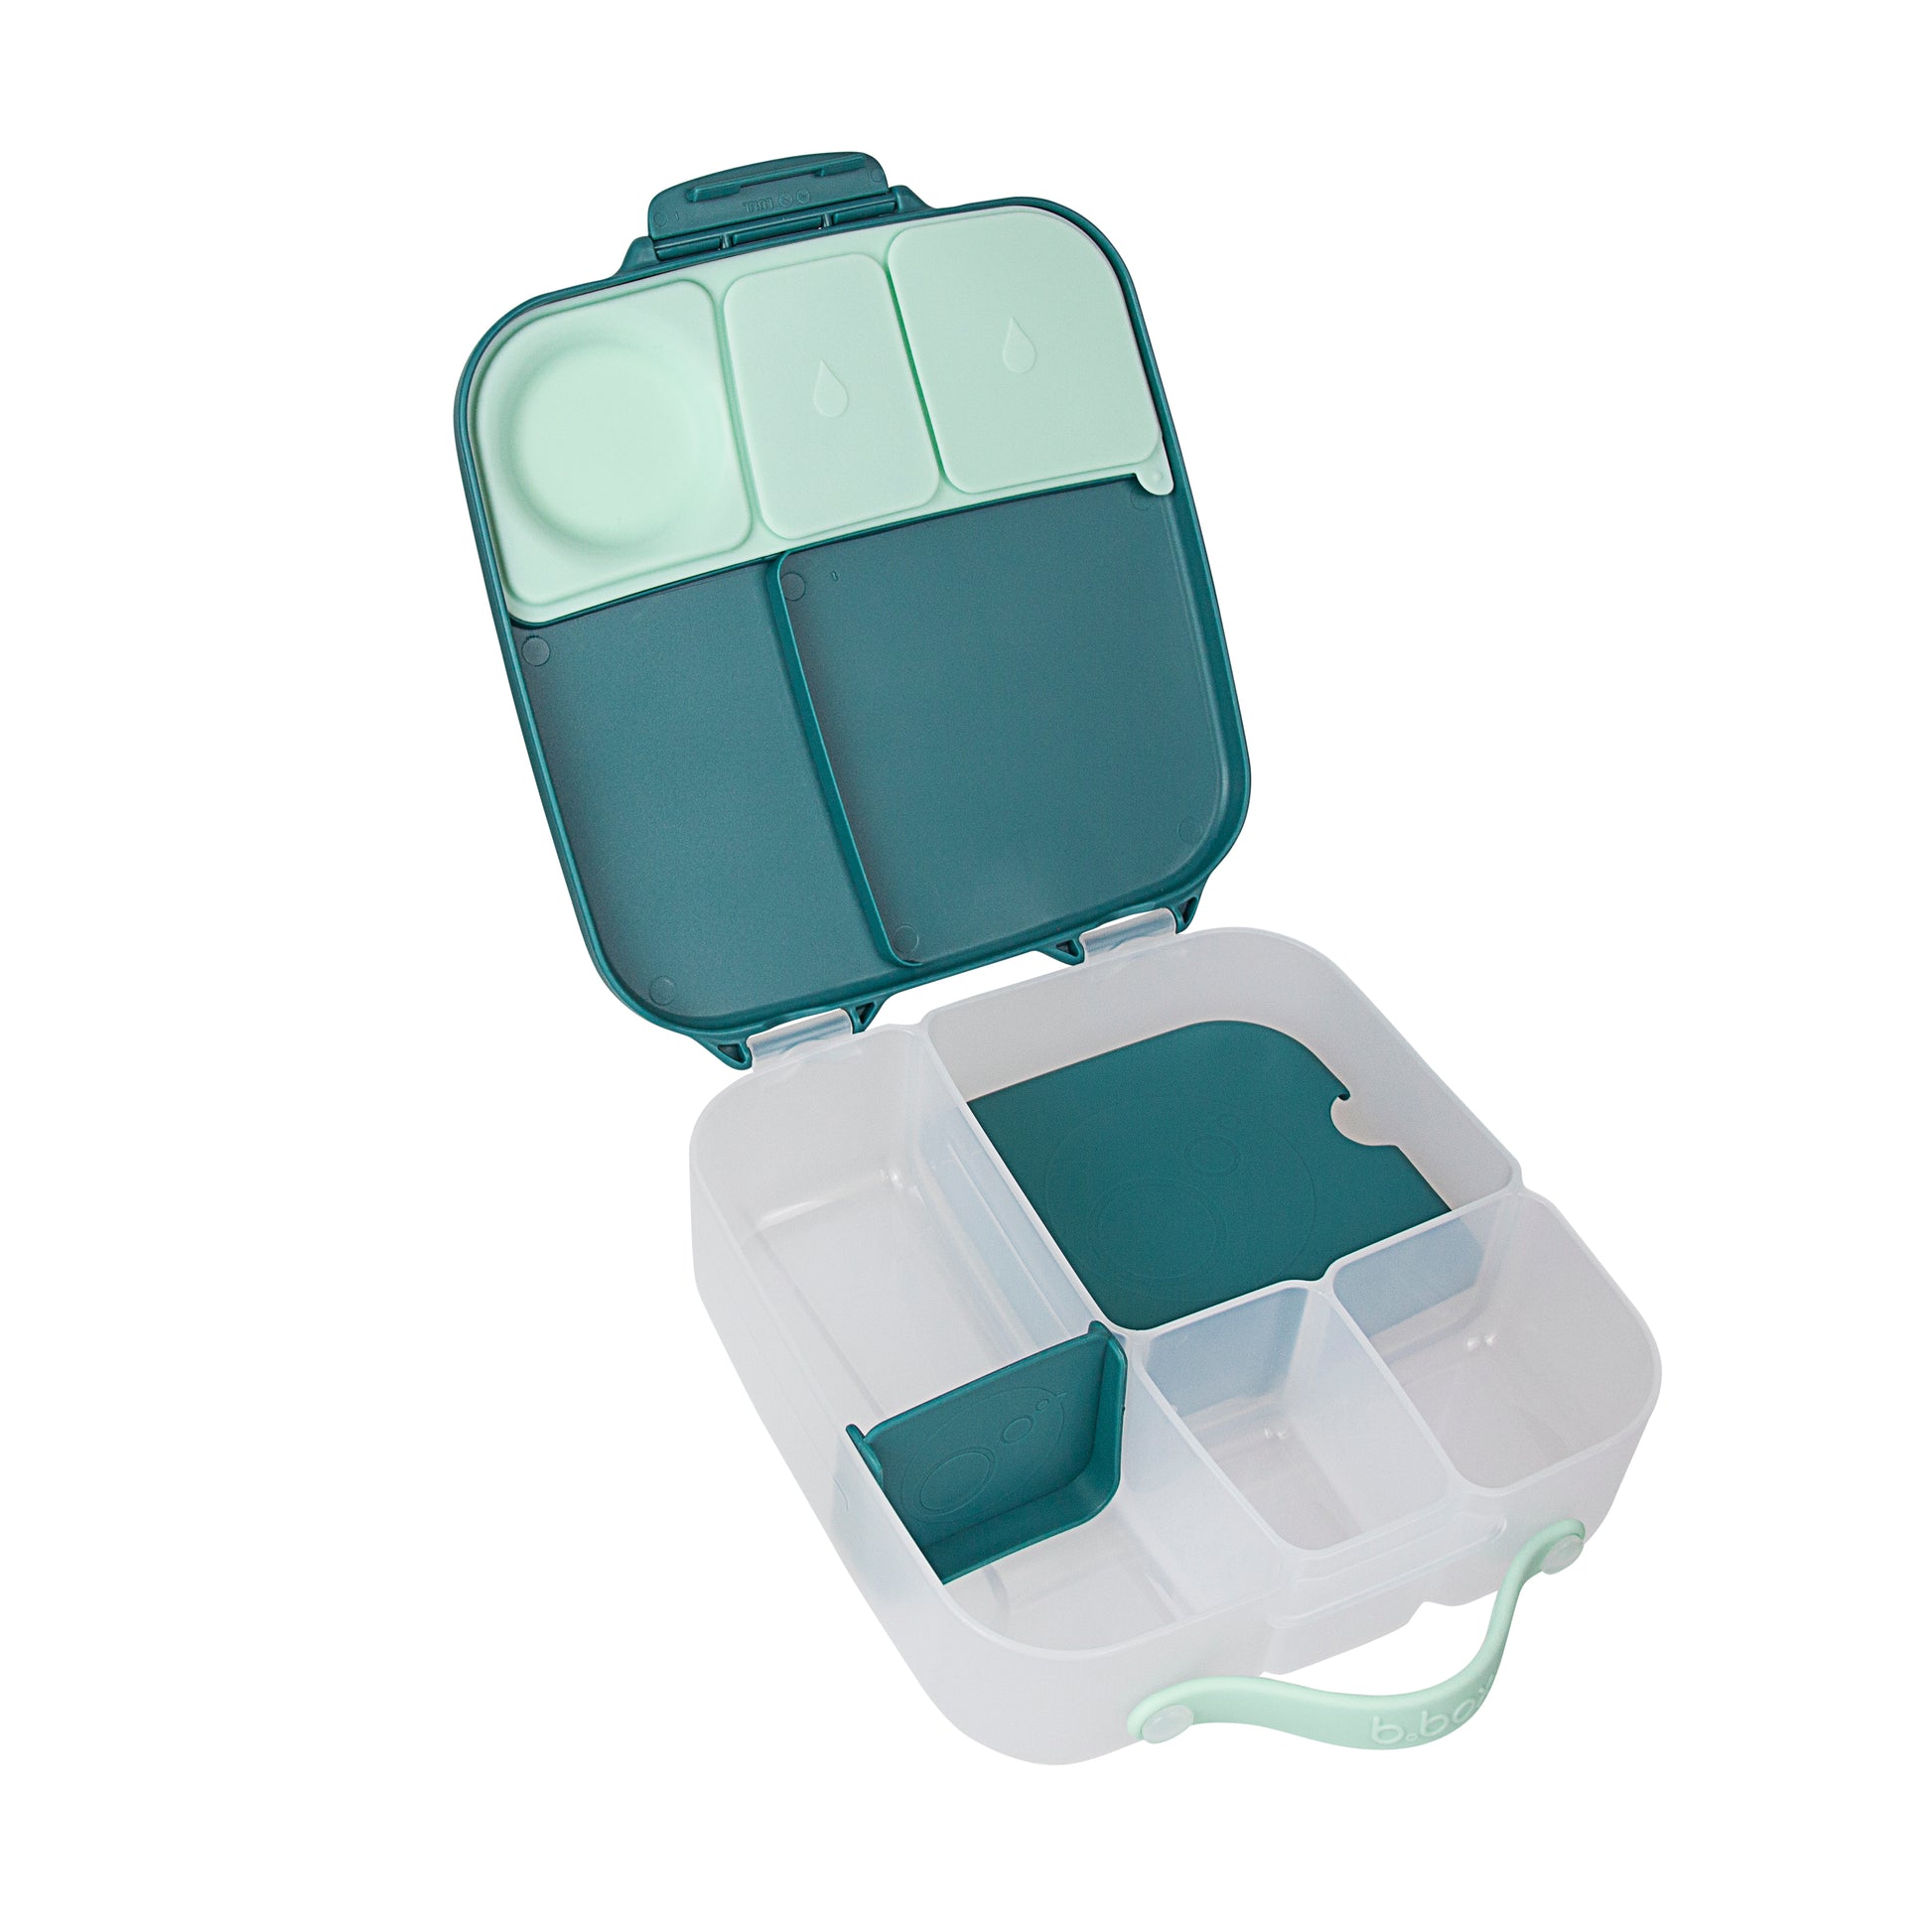 b.box Kids Reusable Lunchbox in Emerald Forest available at Bear & Moo